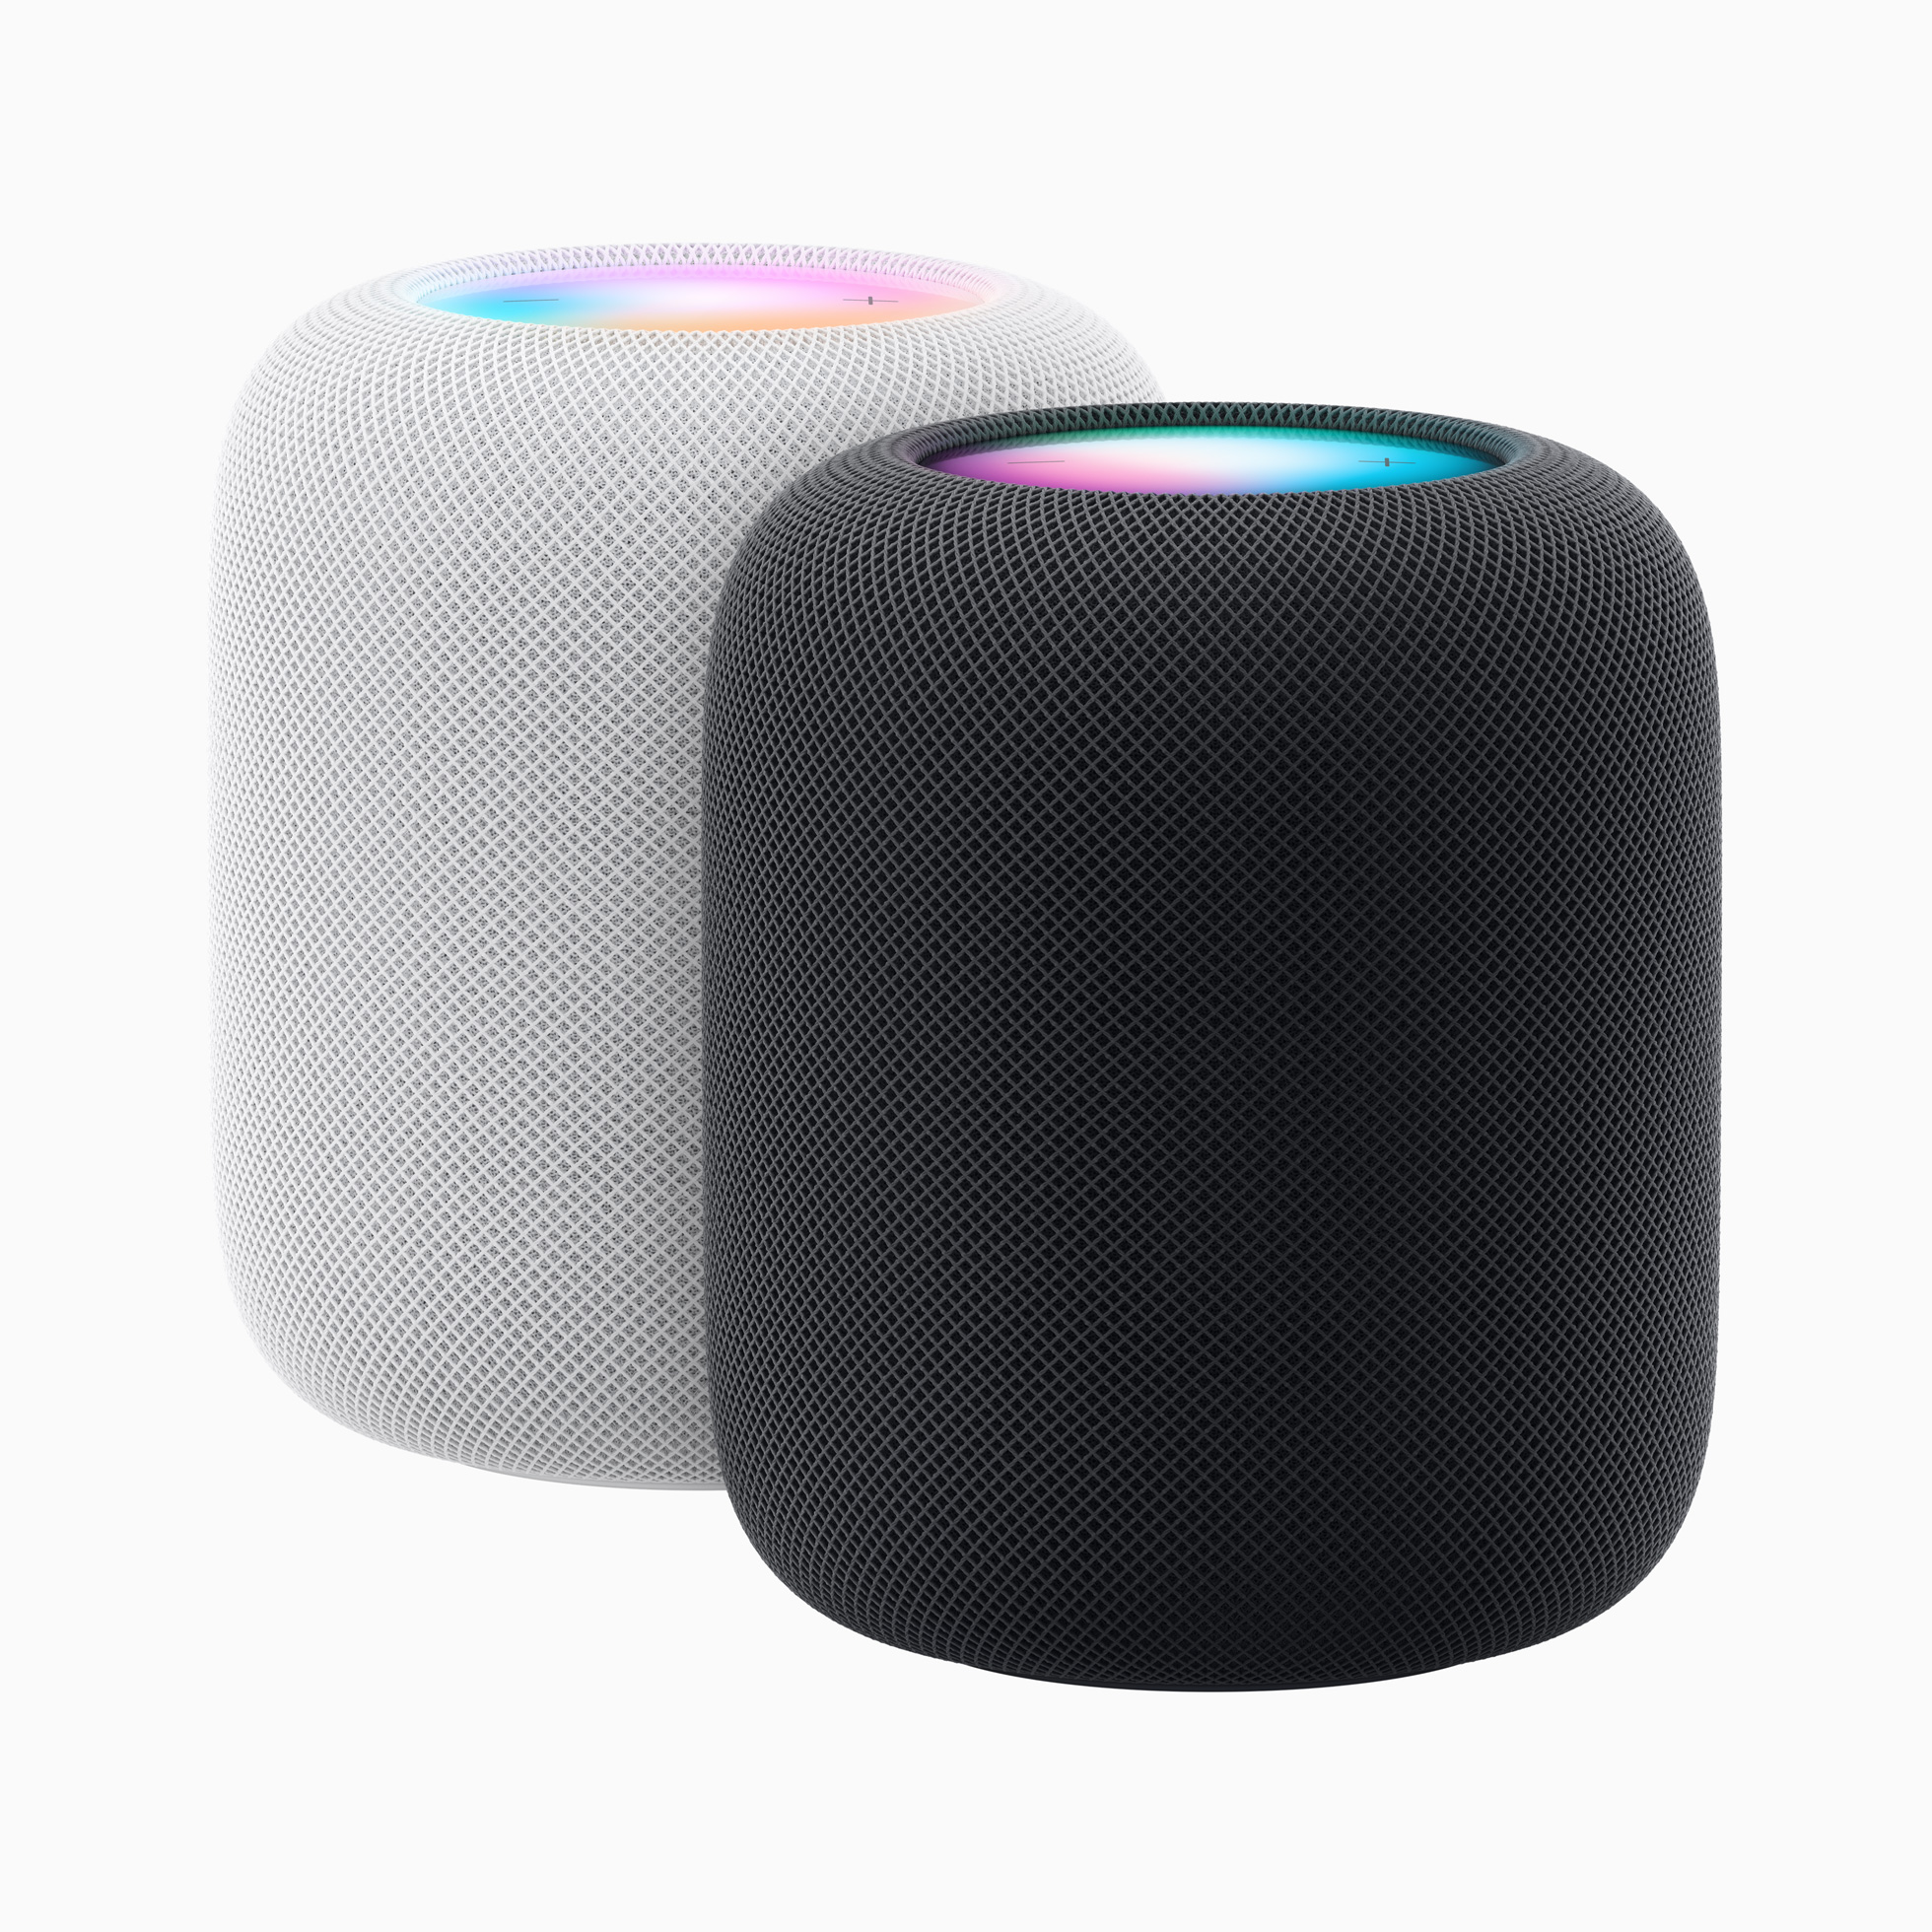 Apple HomePod smart speakers in black and white